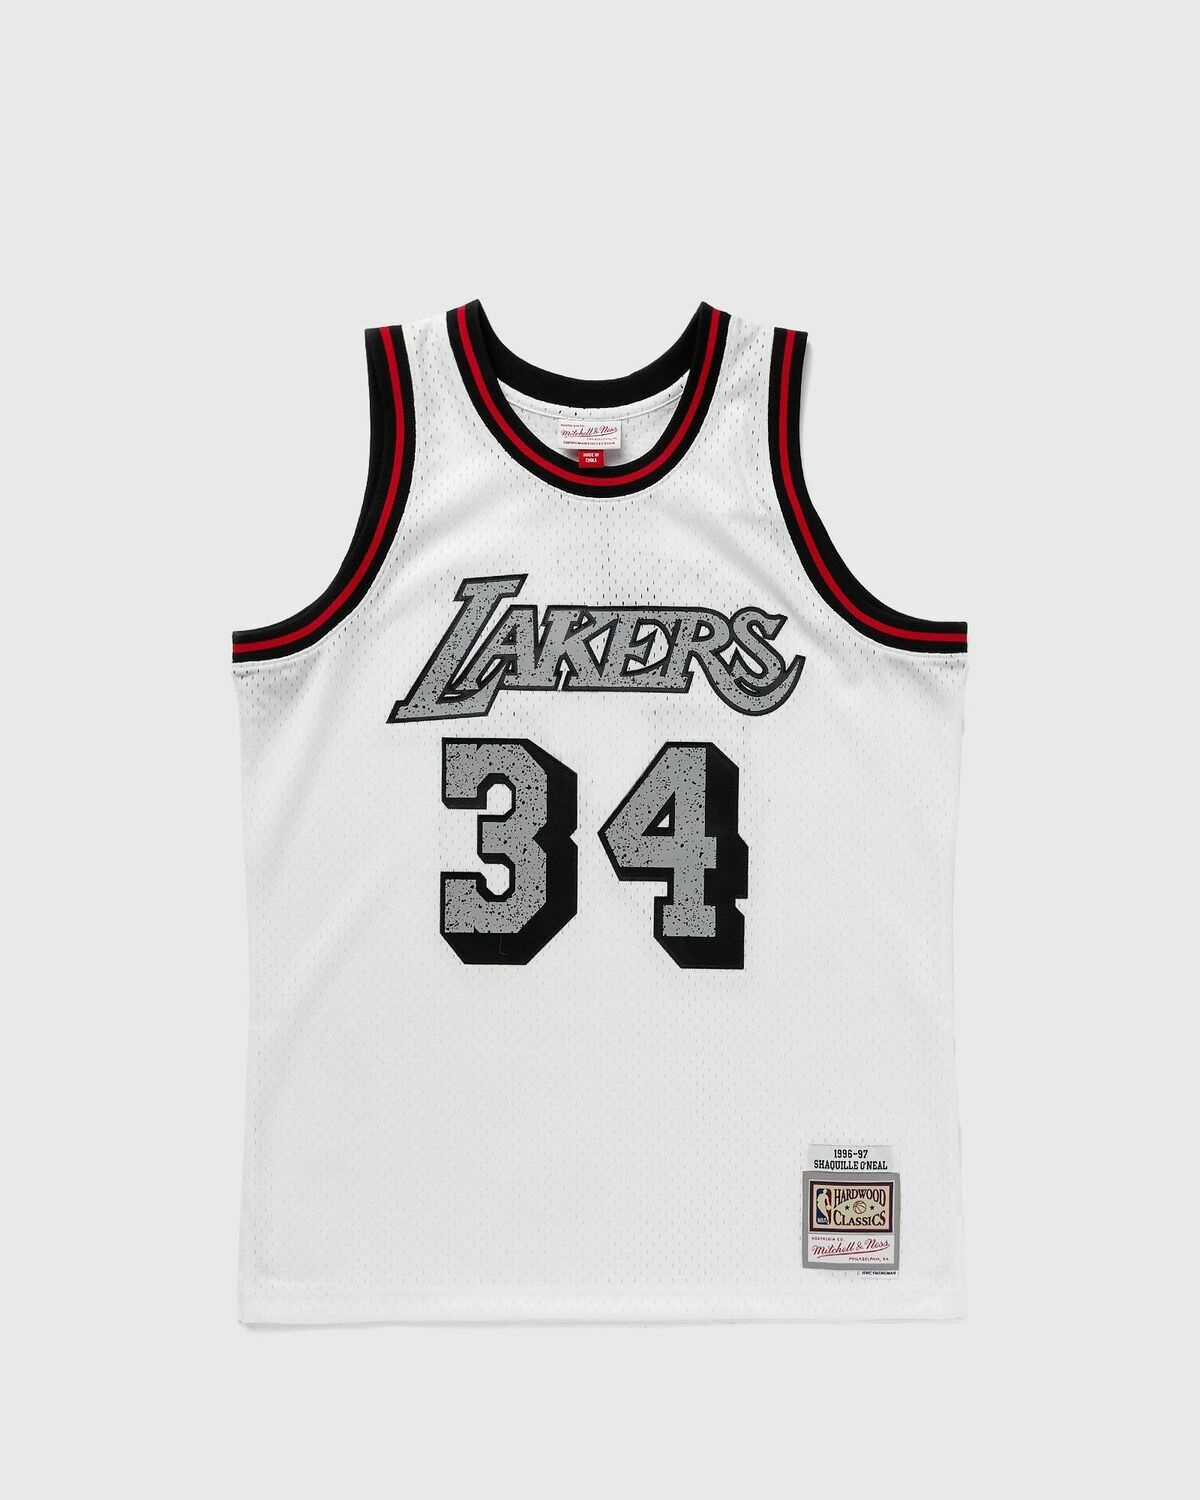 Mitchell & Ness Nba Cracked Cement Swingman Jersey Lakers 1996 97 Shaquille O'neal #34 White - Mens - Jerseys